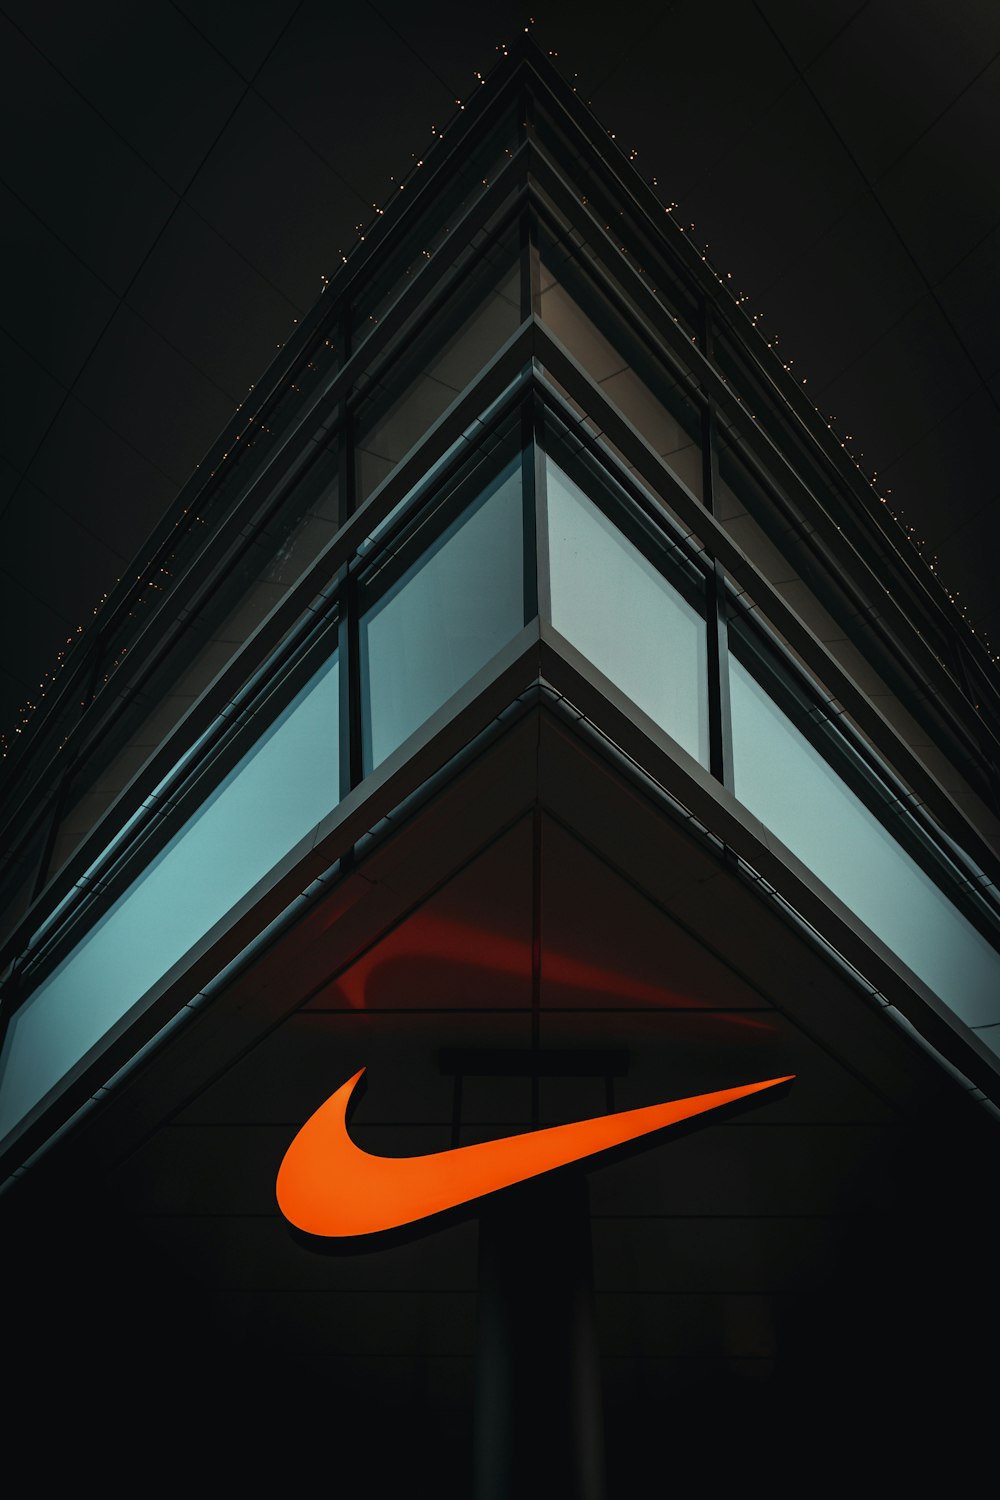 the nike logo is lit up on the side of a building